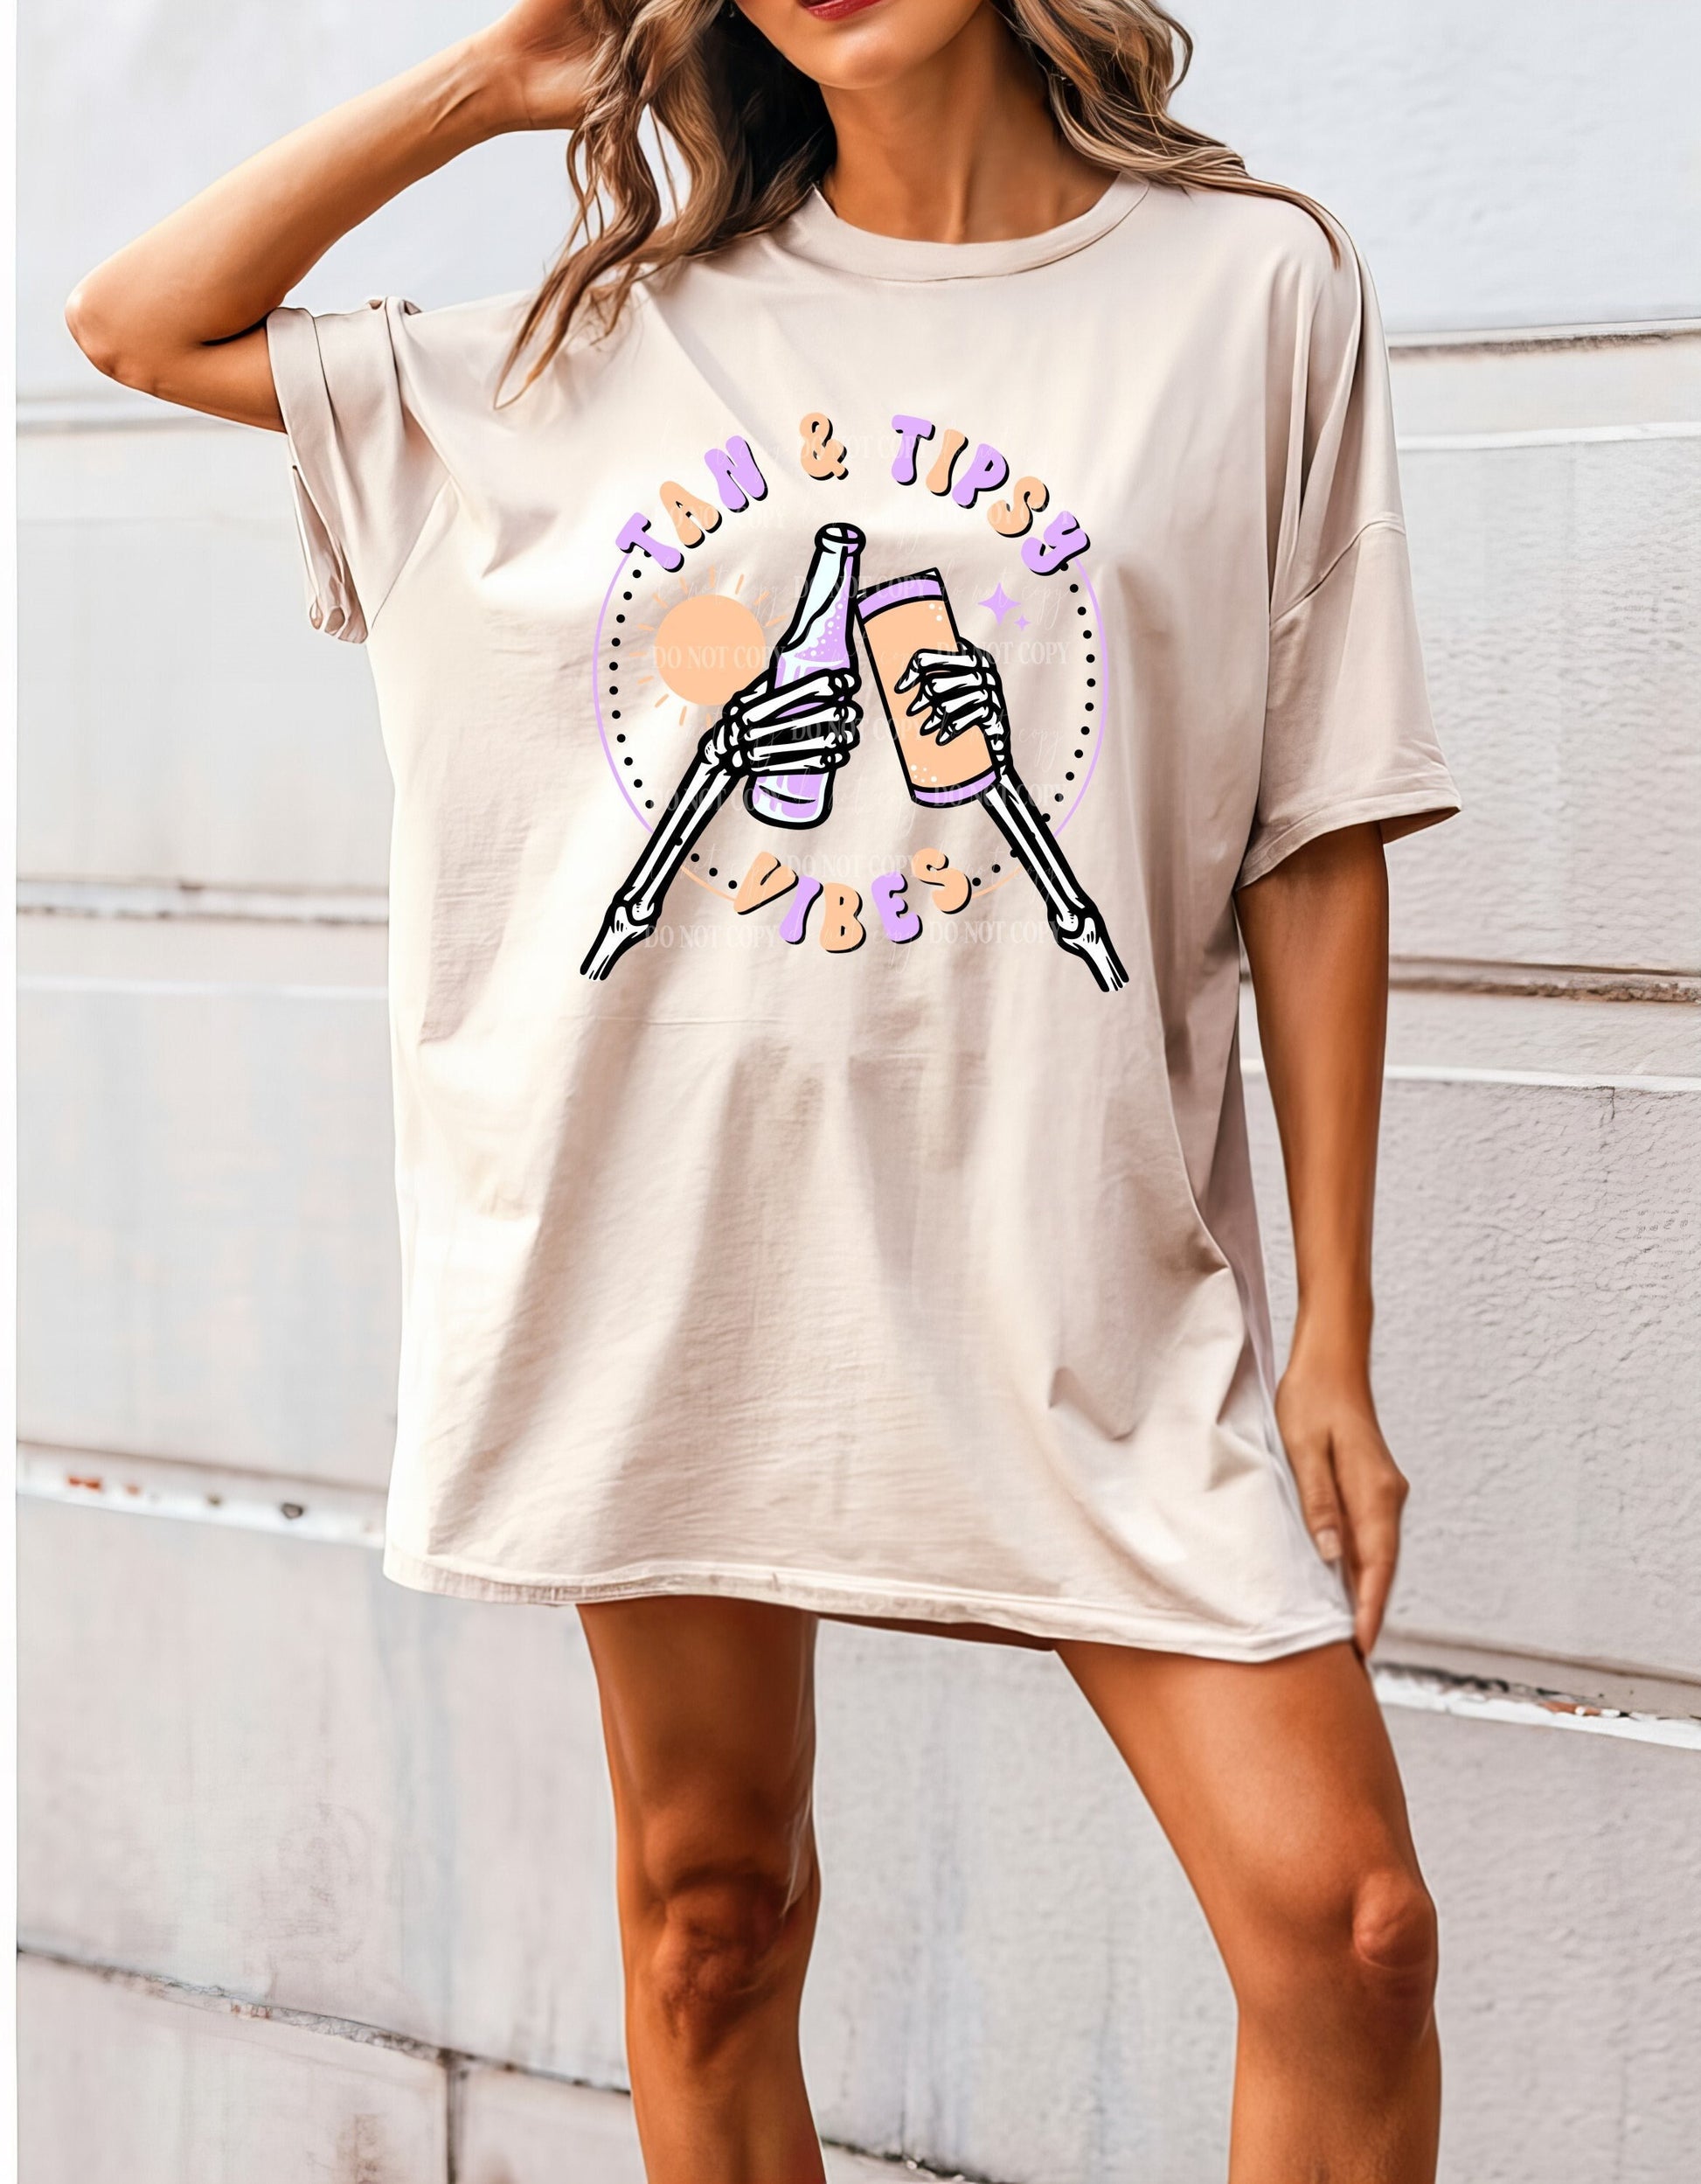 Tan and Tipsy Vibes Graphic T-Shirt - Fun Summer Top for Beach Days